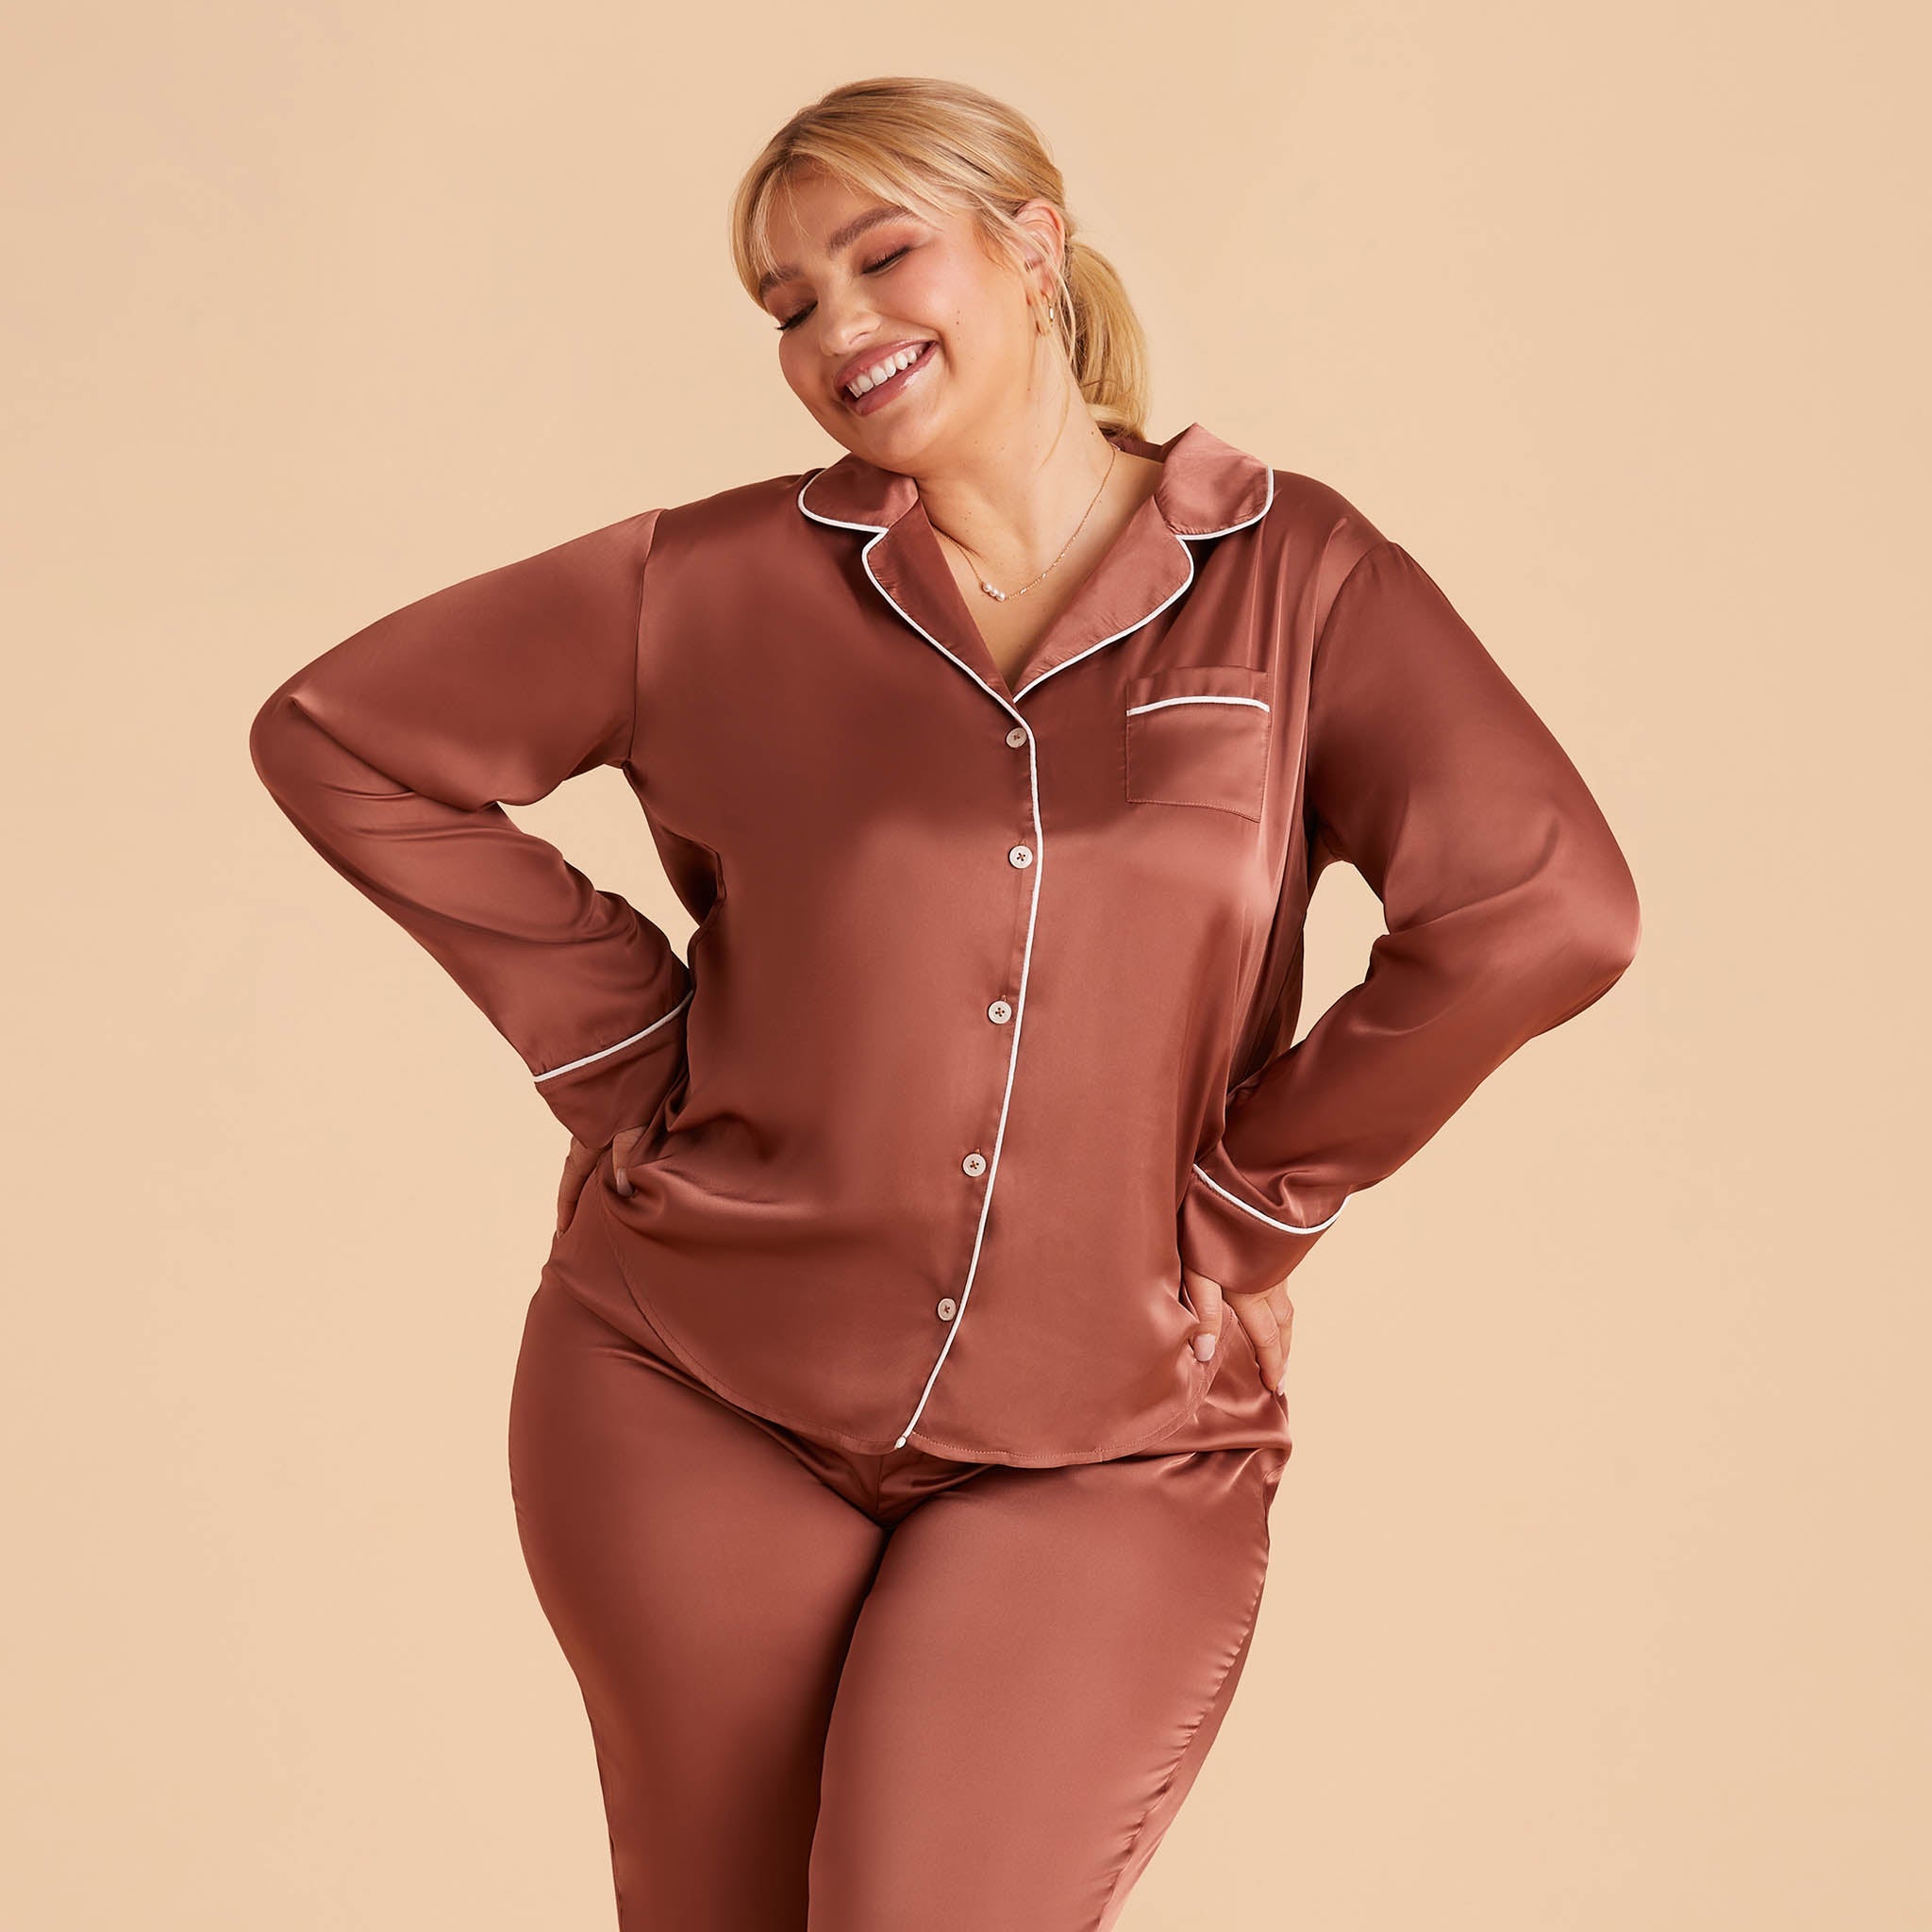 Jonny Plus Size Satin Long Sleeve Pajama Top With White Piping in desert rose, front view